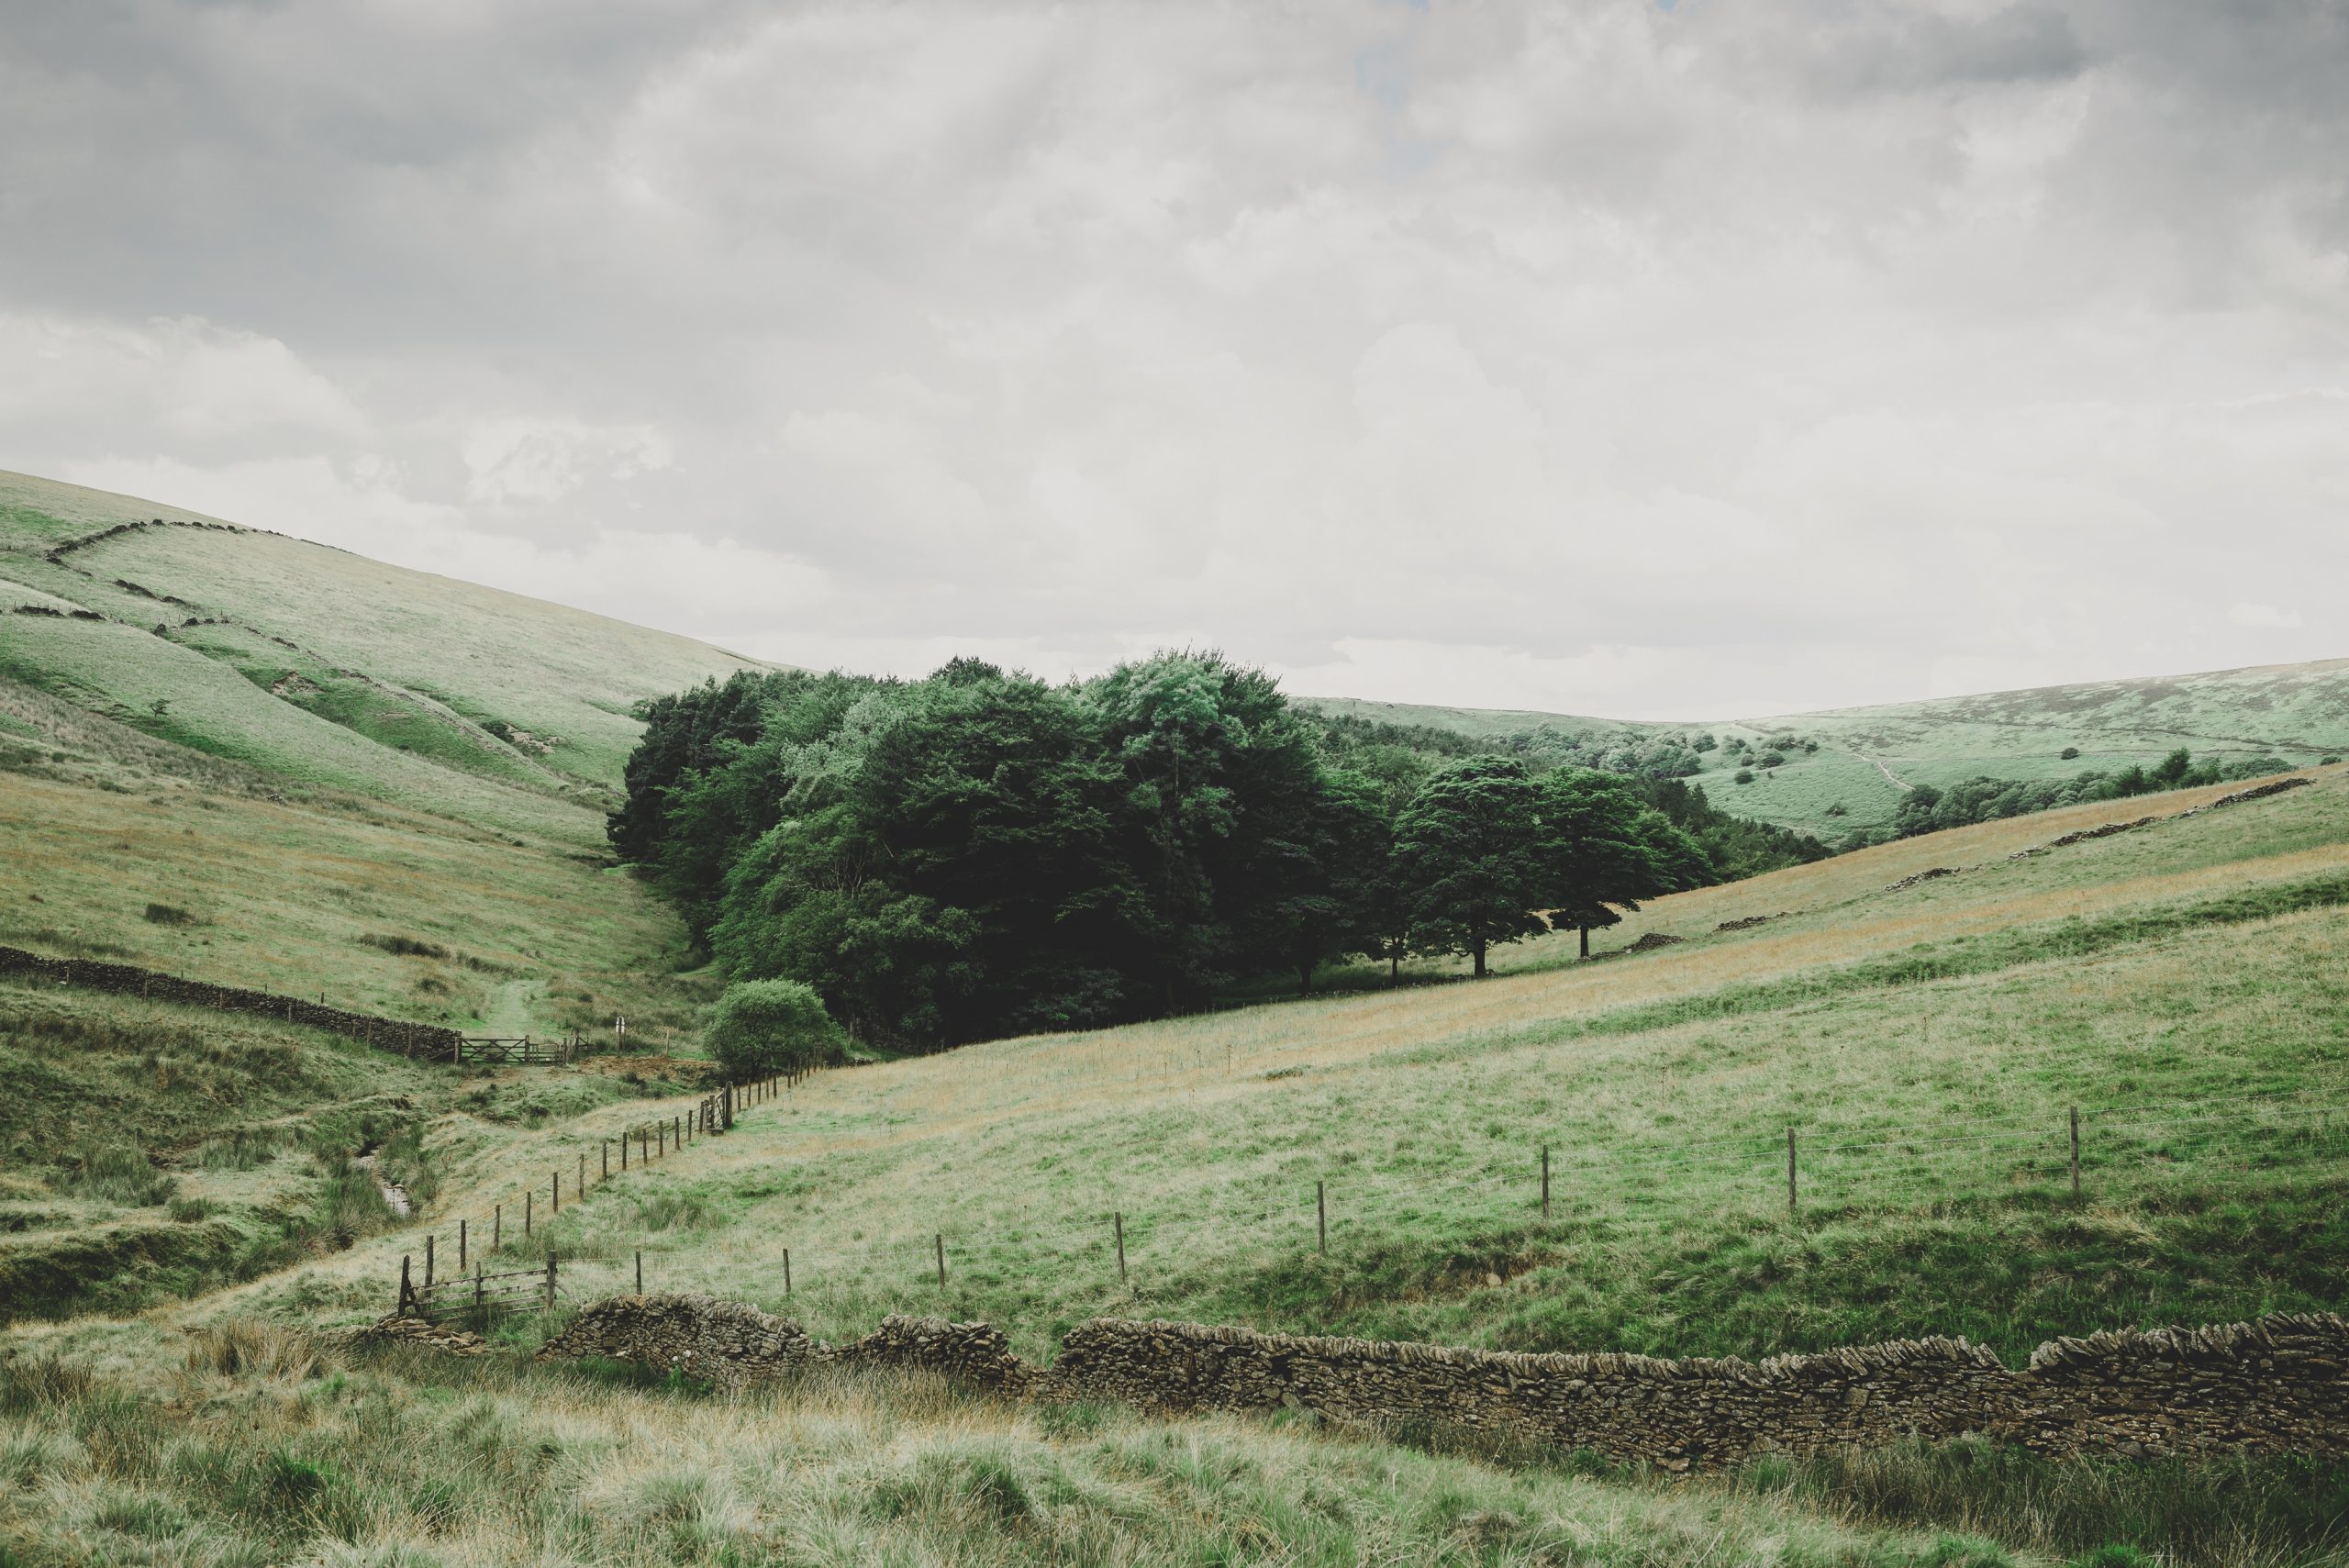 Peak District hills and trees